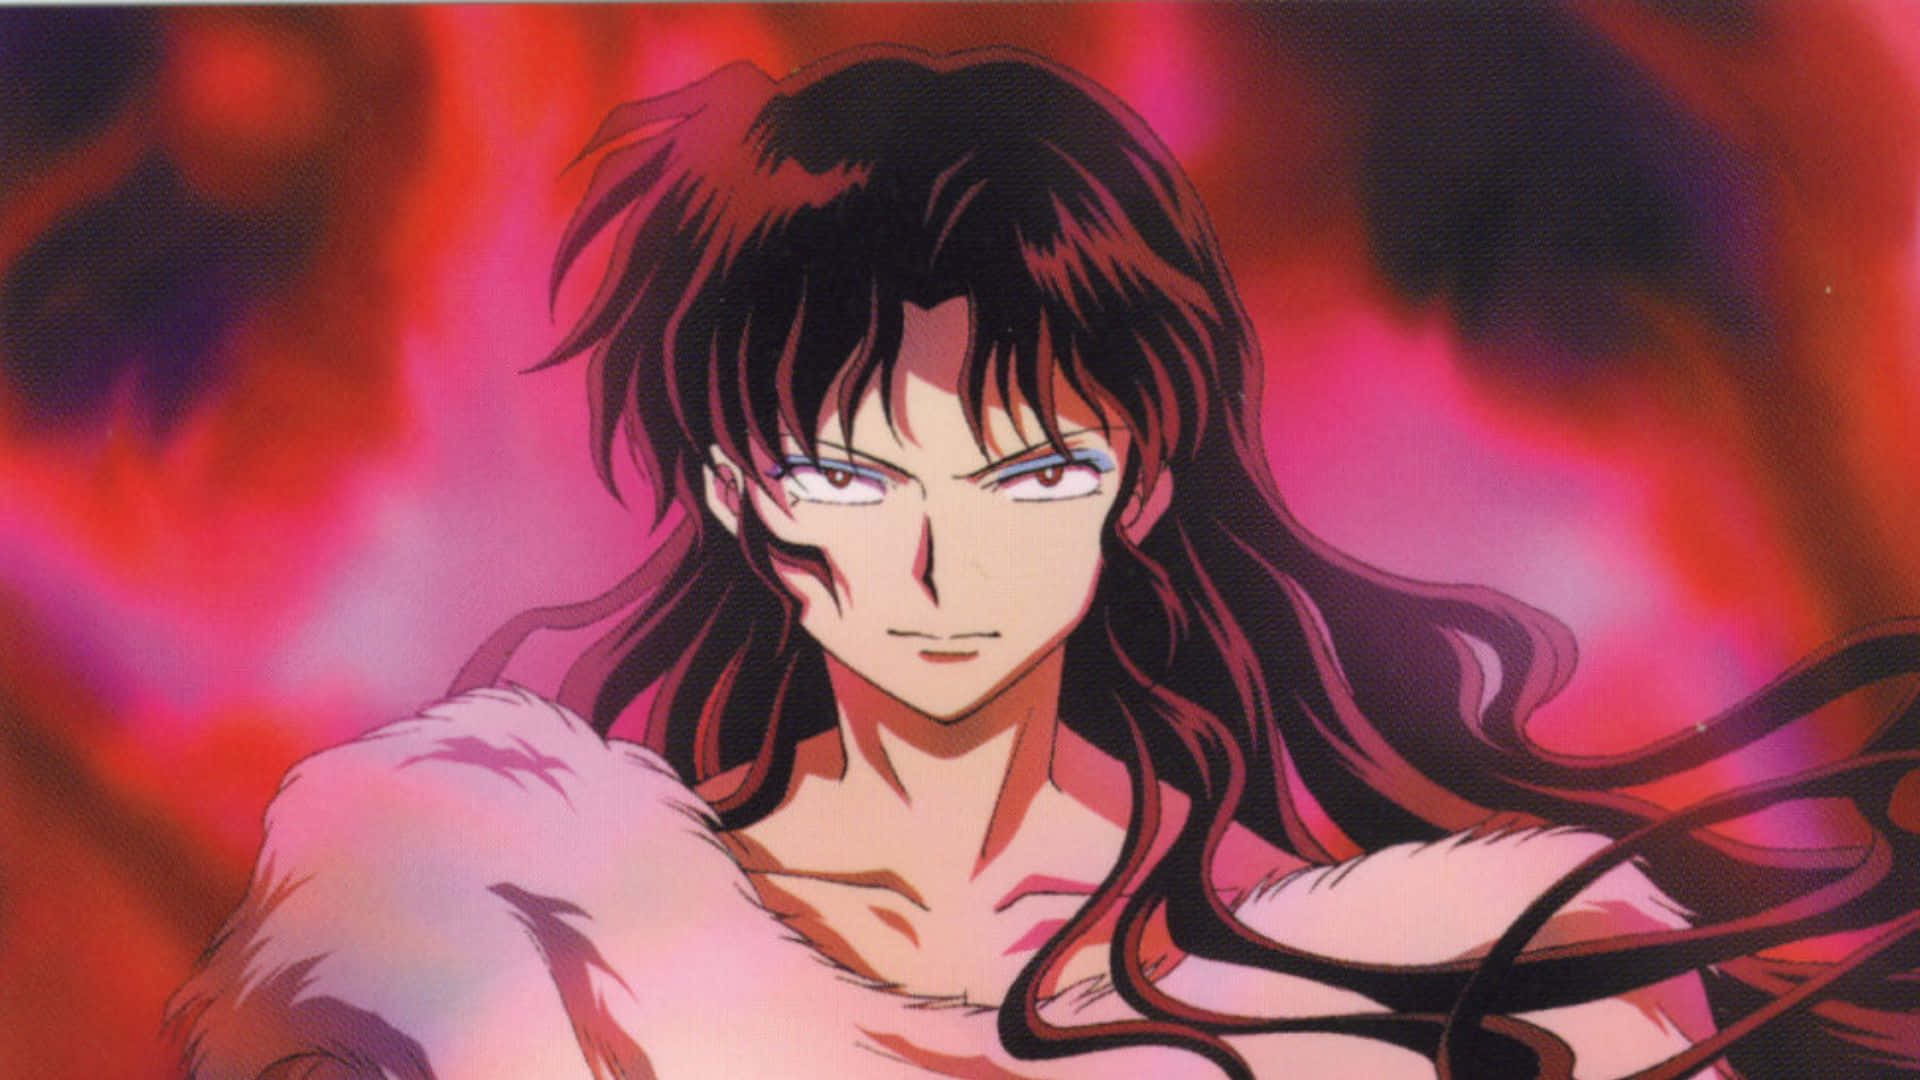 Sinister Naraku Stands Tall in the Shadows Wallpaper